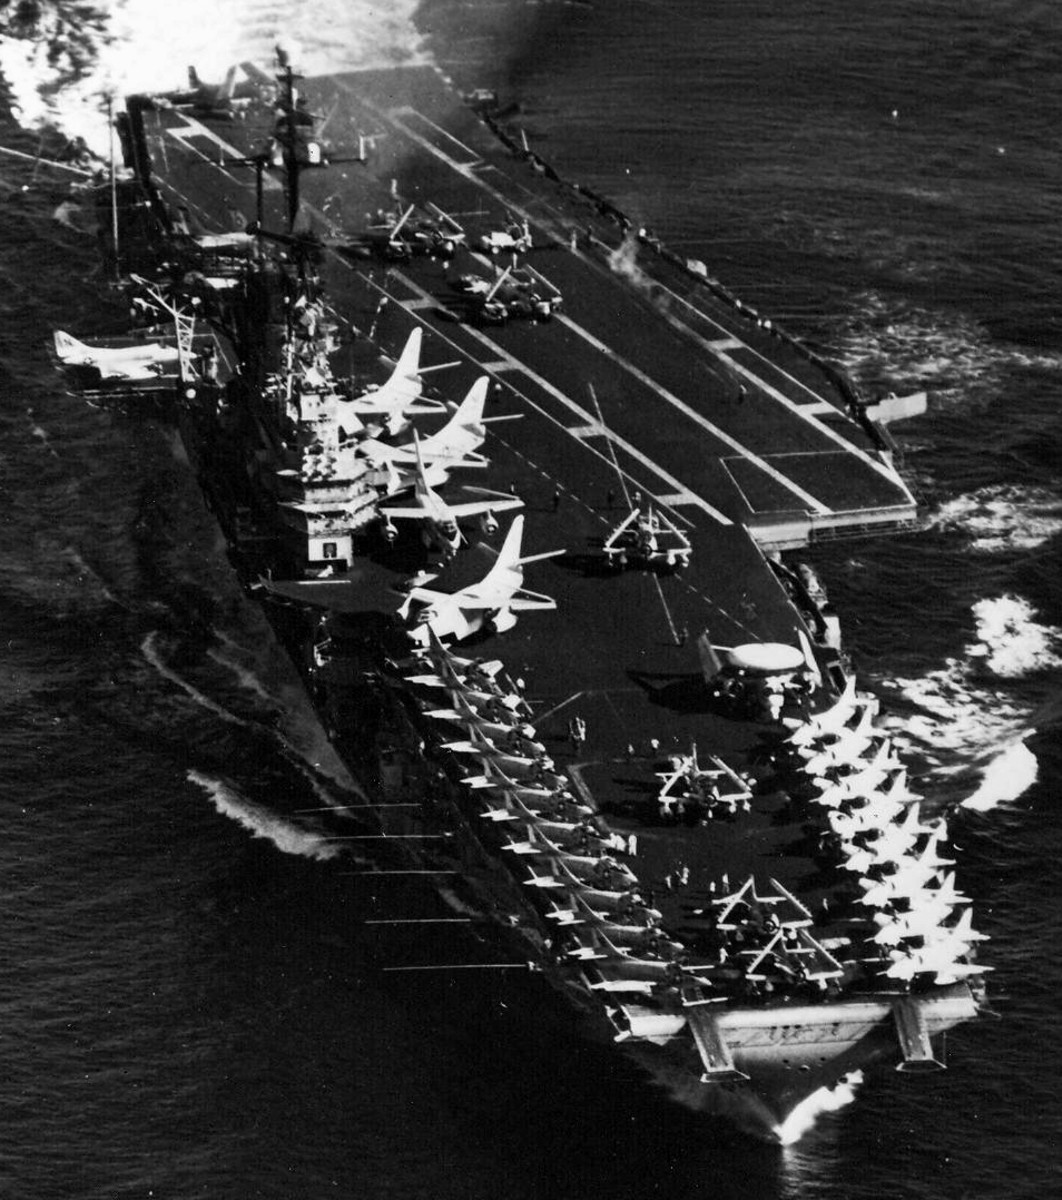 cvw-2 carrier air wing us navy uss midway cva-41 embarked squadrons 13